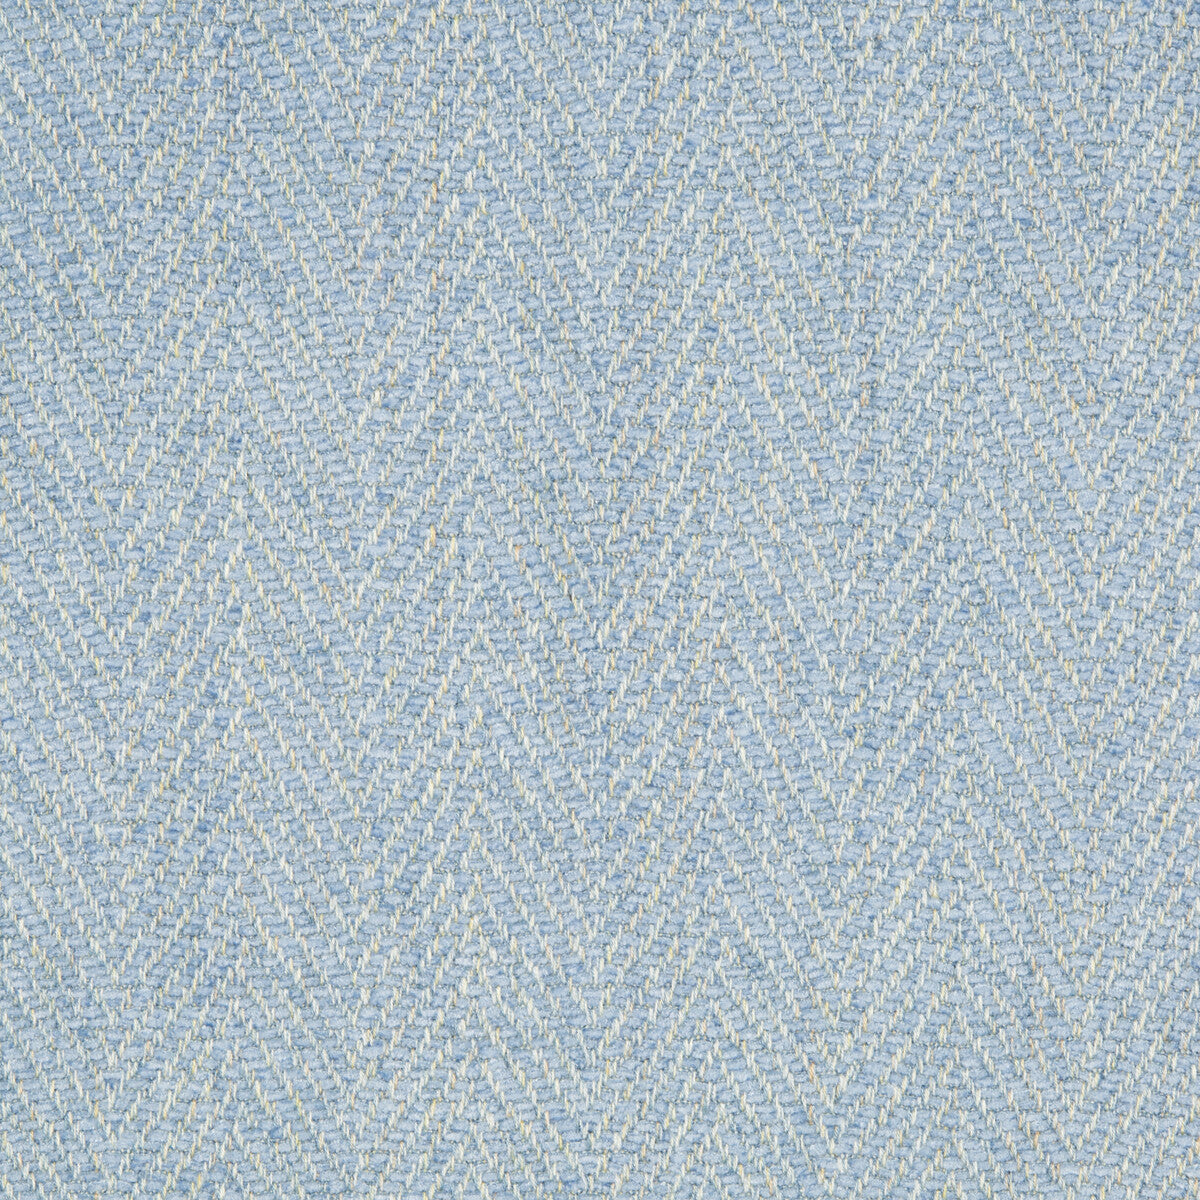 Firle Chenille II fabric in sky color - pattern 8017140.15.0 - by Brunschwig &amp; Fils in the Baronet collection